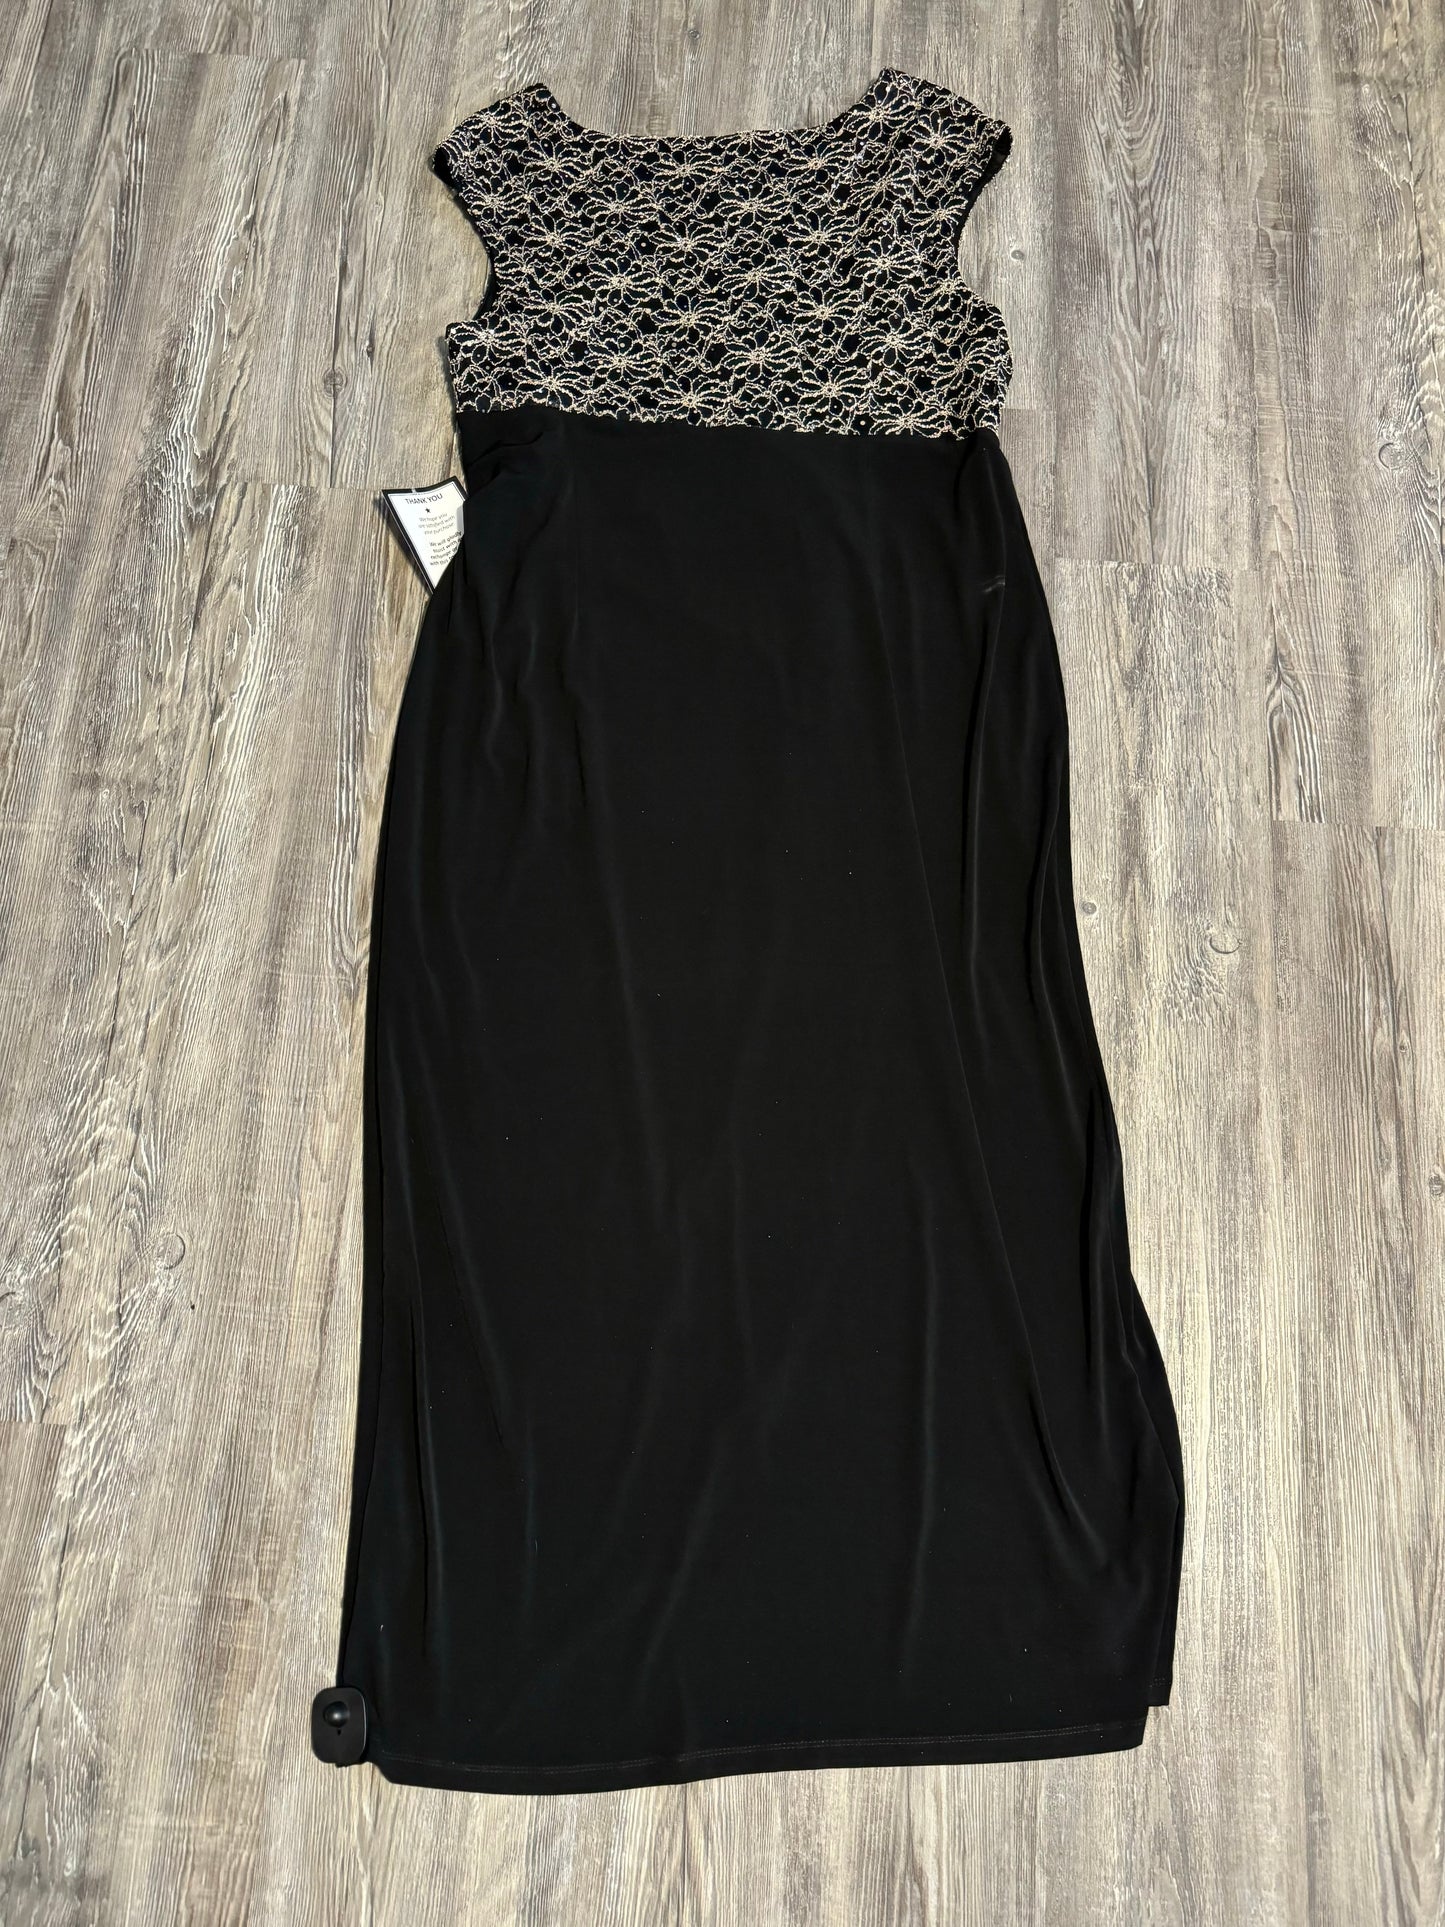 Dress Casual Maxi By Connected Apparel  Size: 18